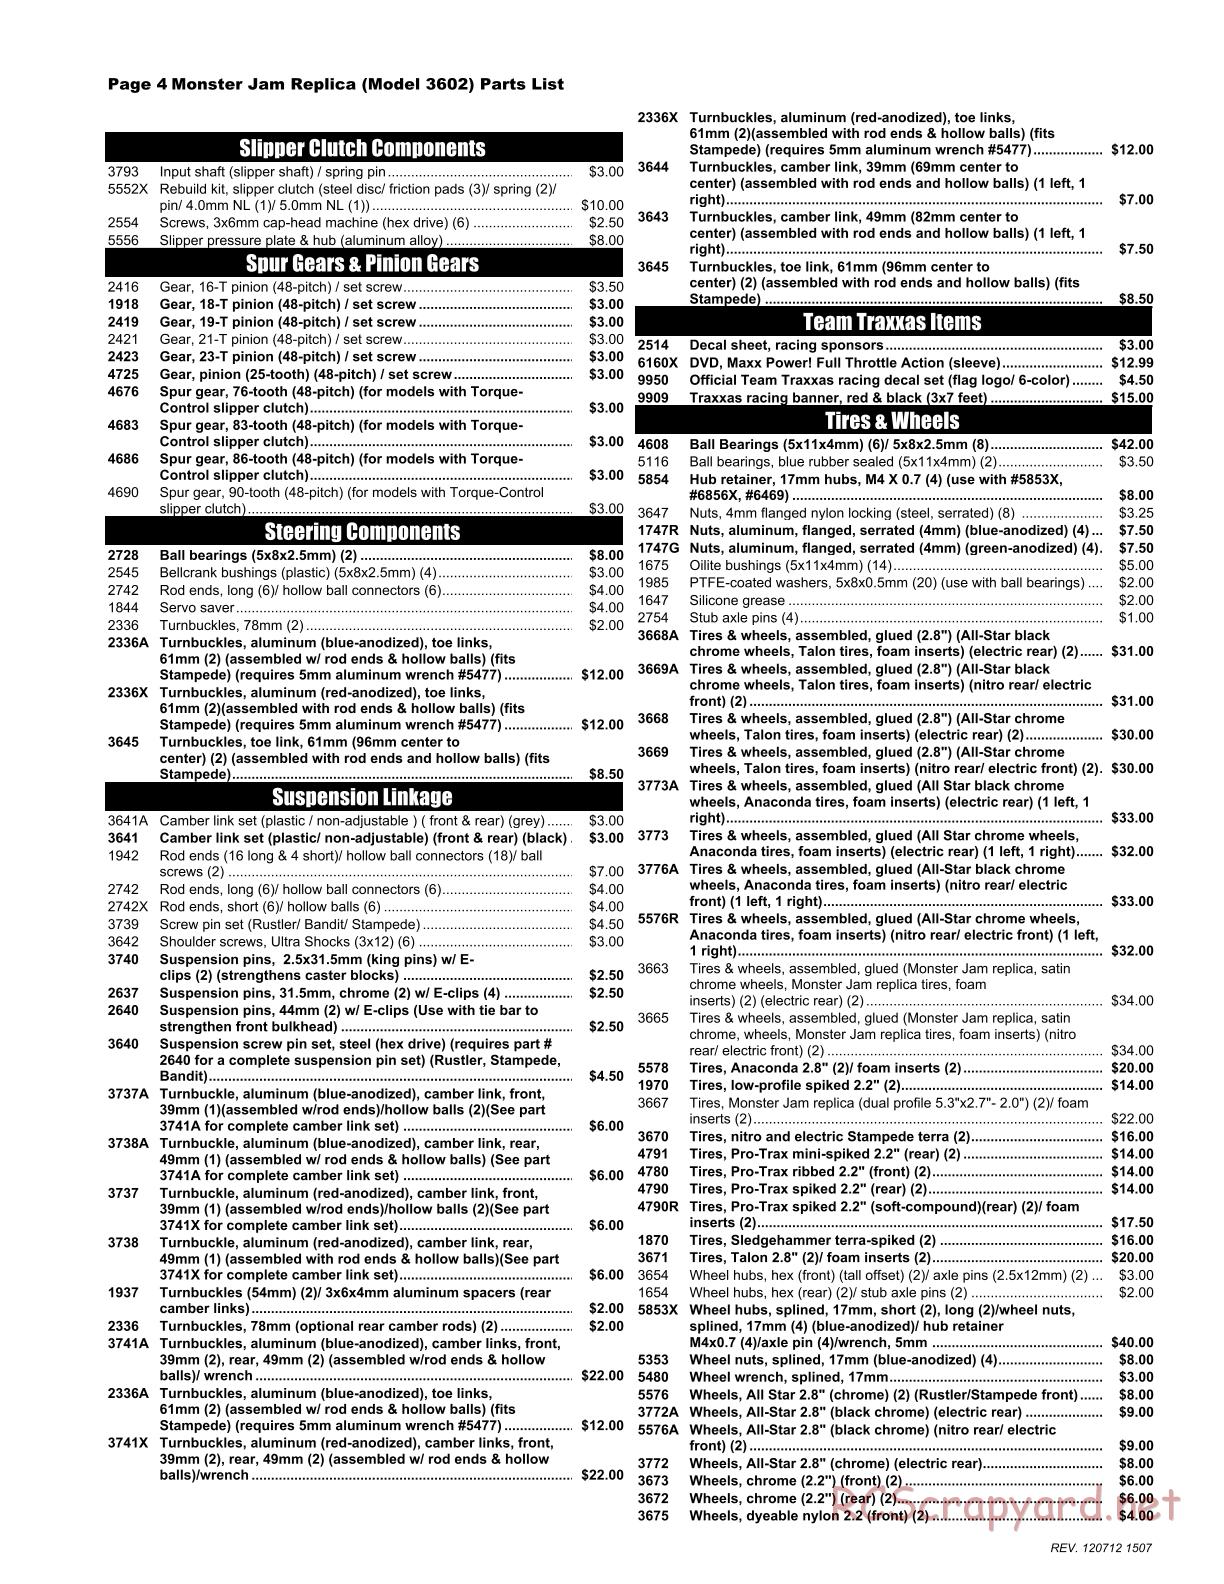 Traxxas - Monster Jam - Parts List - Page 4